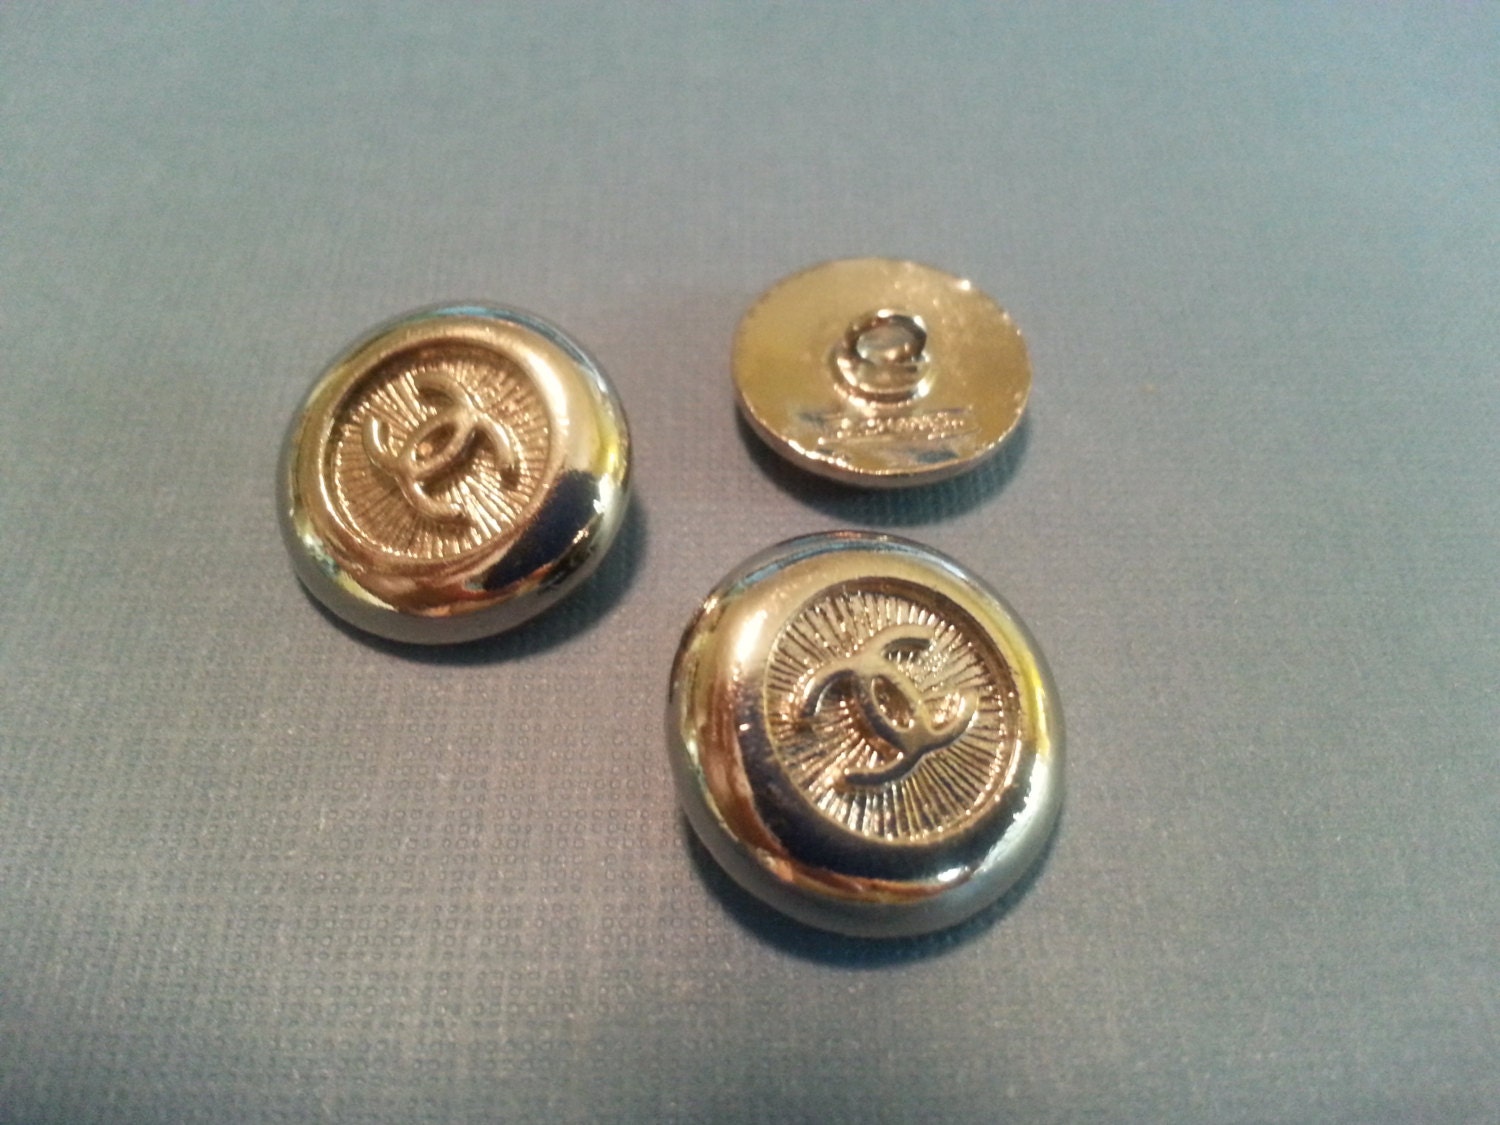 Classic CHANEL button with Gold CC's by MissMermaidsLagoon on Etsy